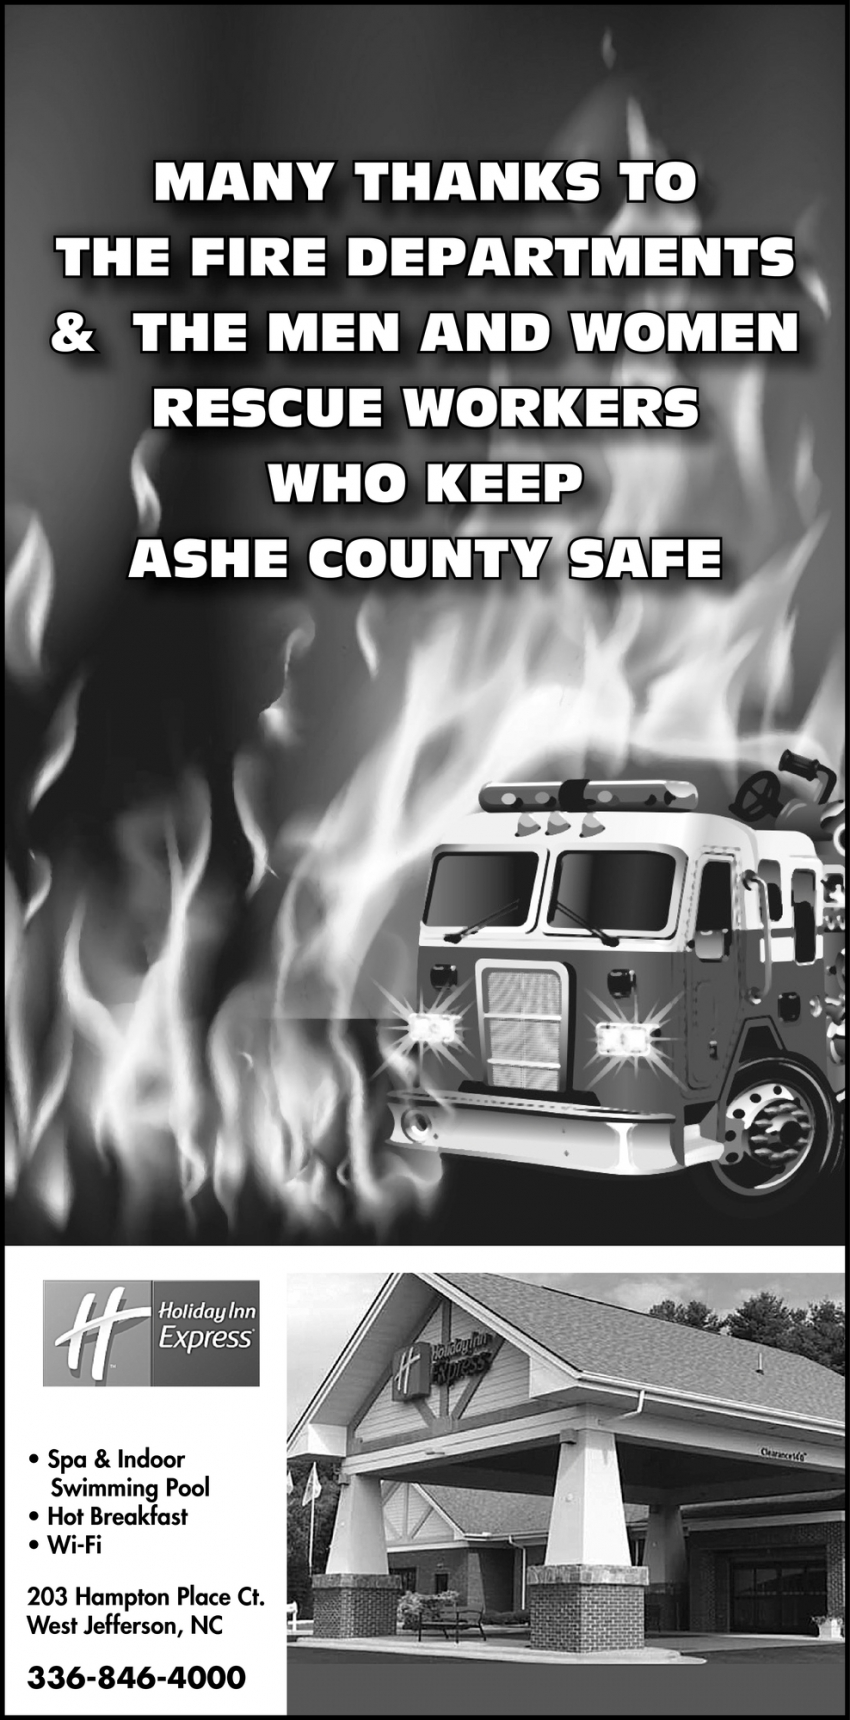 Many Thanks To Fire Departments & Men And Women Rescue Workers Who Keep Ashe County Safe